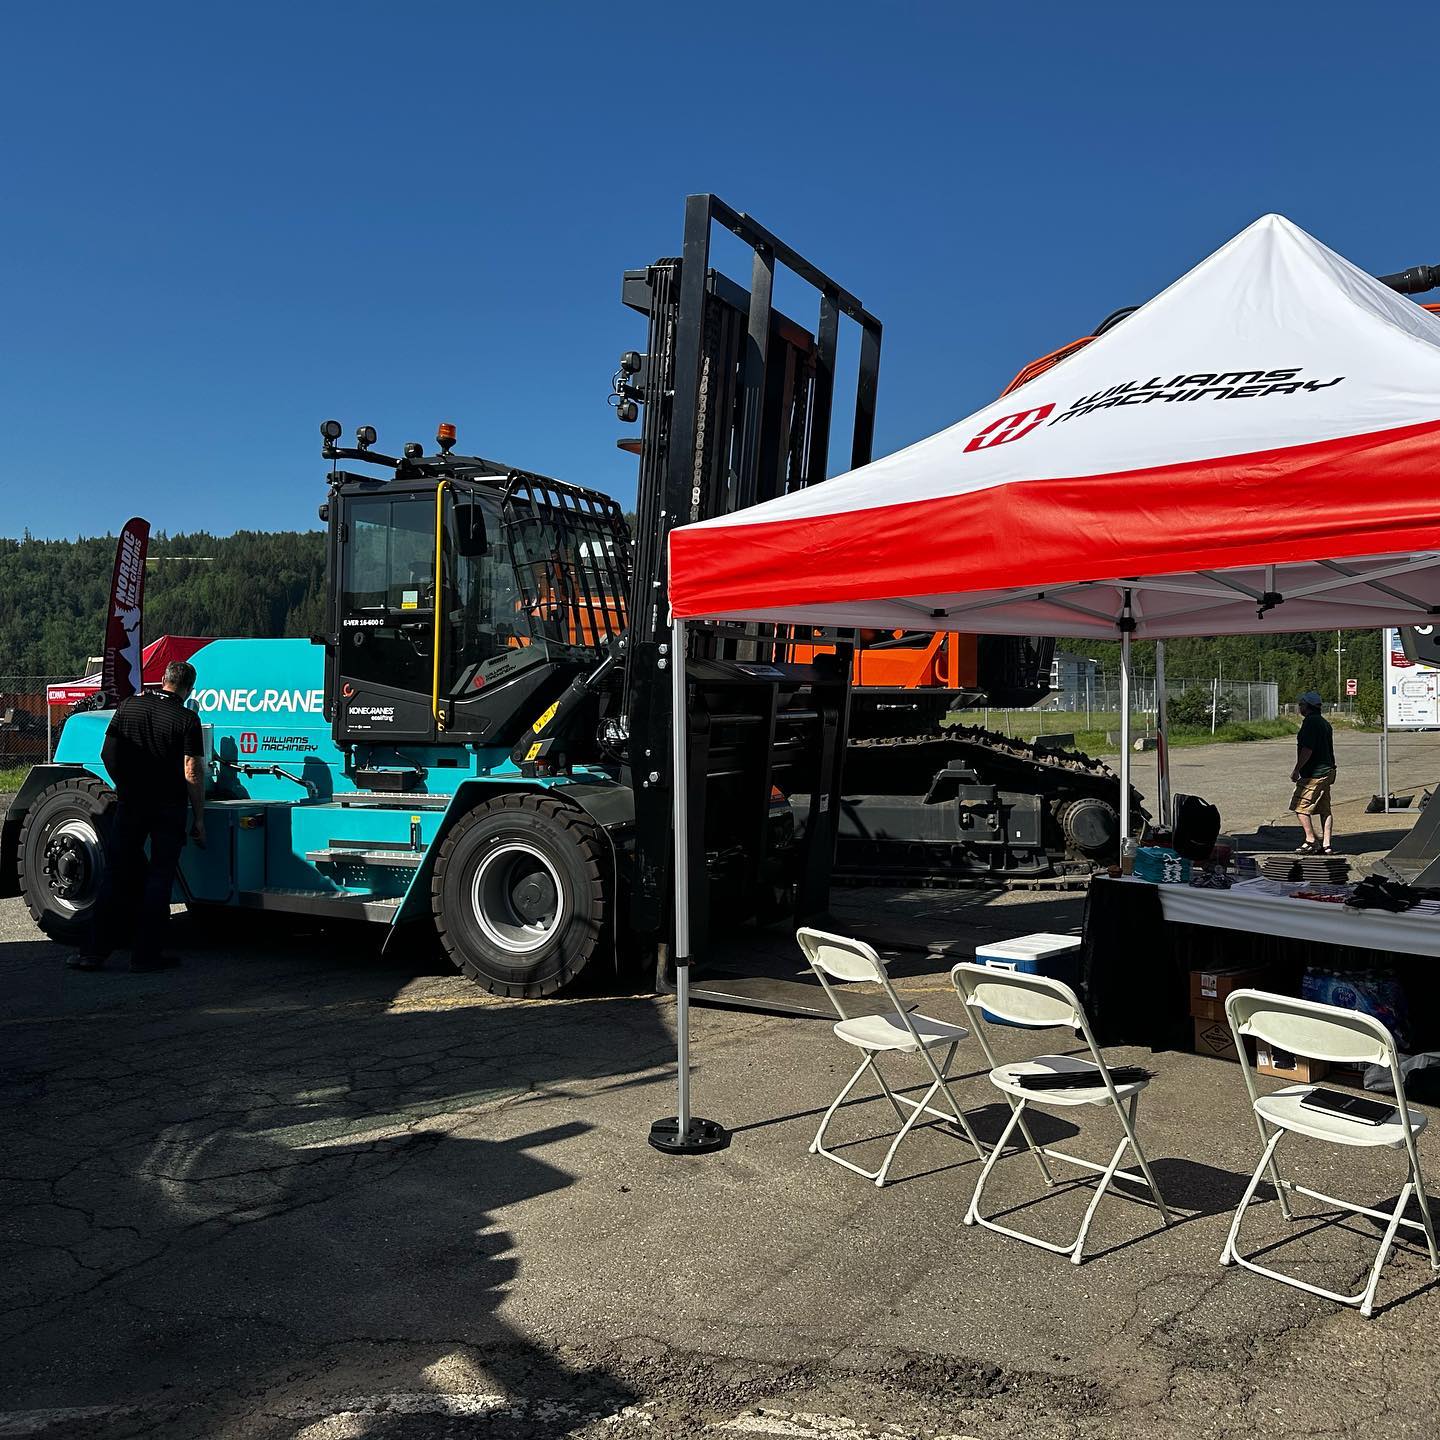 Come and check out the first North American all electric Konecrane at our booth today (P44) at the Canadian North Resources Expo in Prince George! 

#CNRE #PrinceGeorge #WilliamsMachinery #Expo #Konecranes #Linde #Bobcat #Develon #konecraneslifttrucks #konecraneelectric #electricvehicle